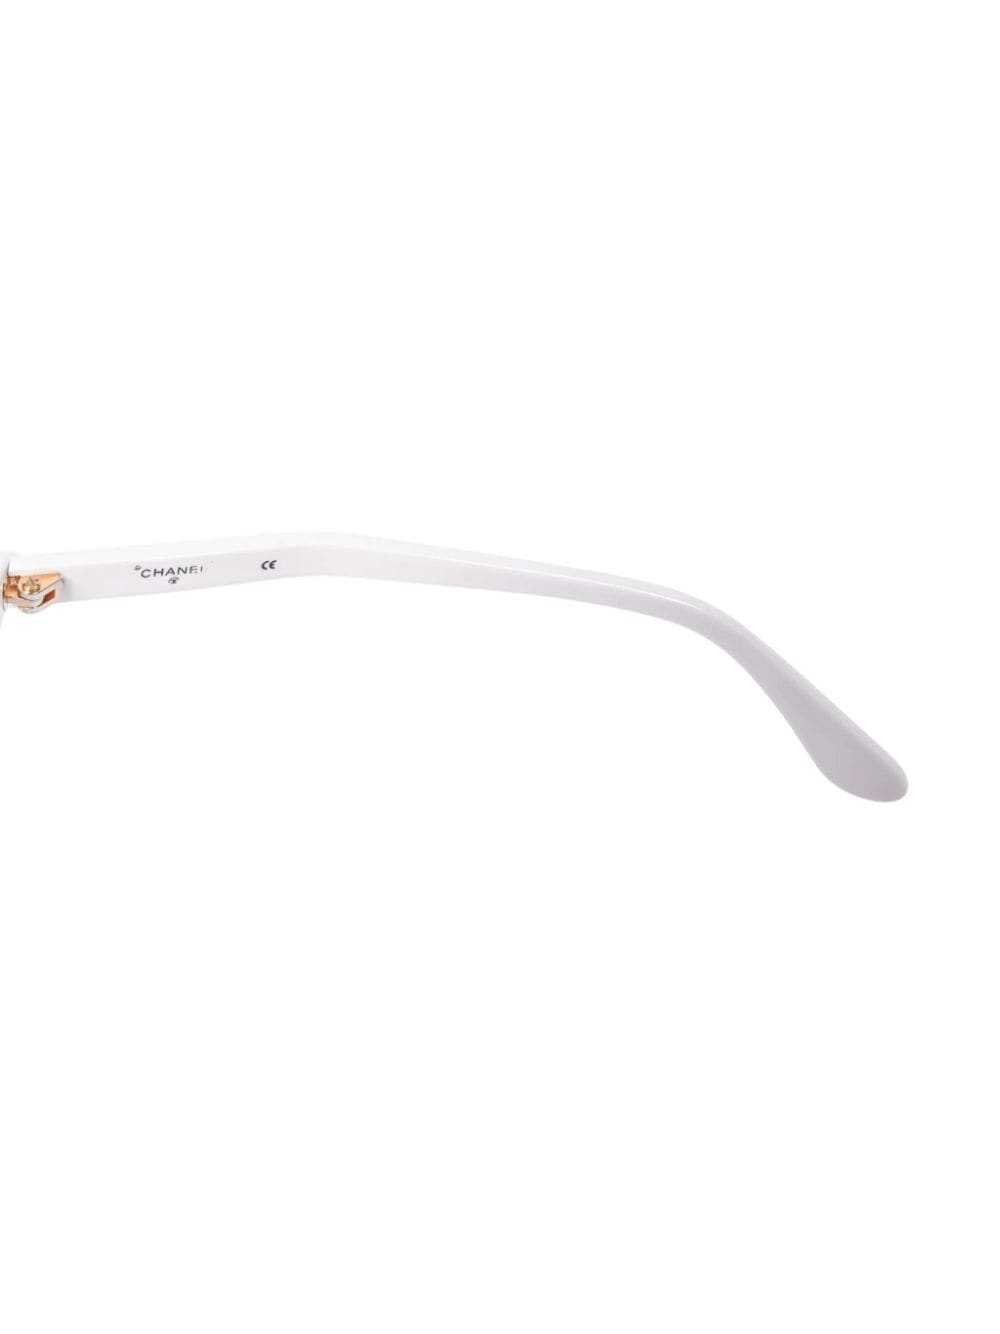 CHANEL Pre-Owned 1994 CC Runway sunglasses - White - image 5